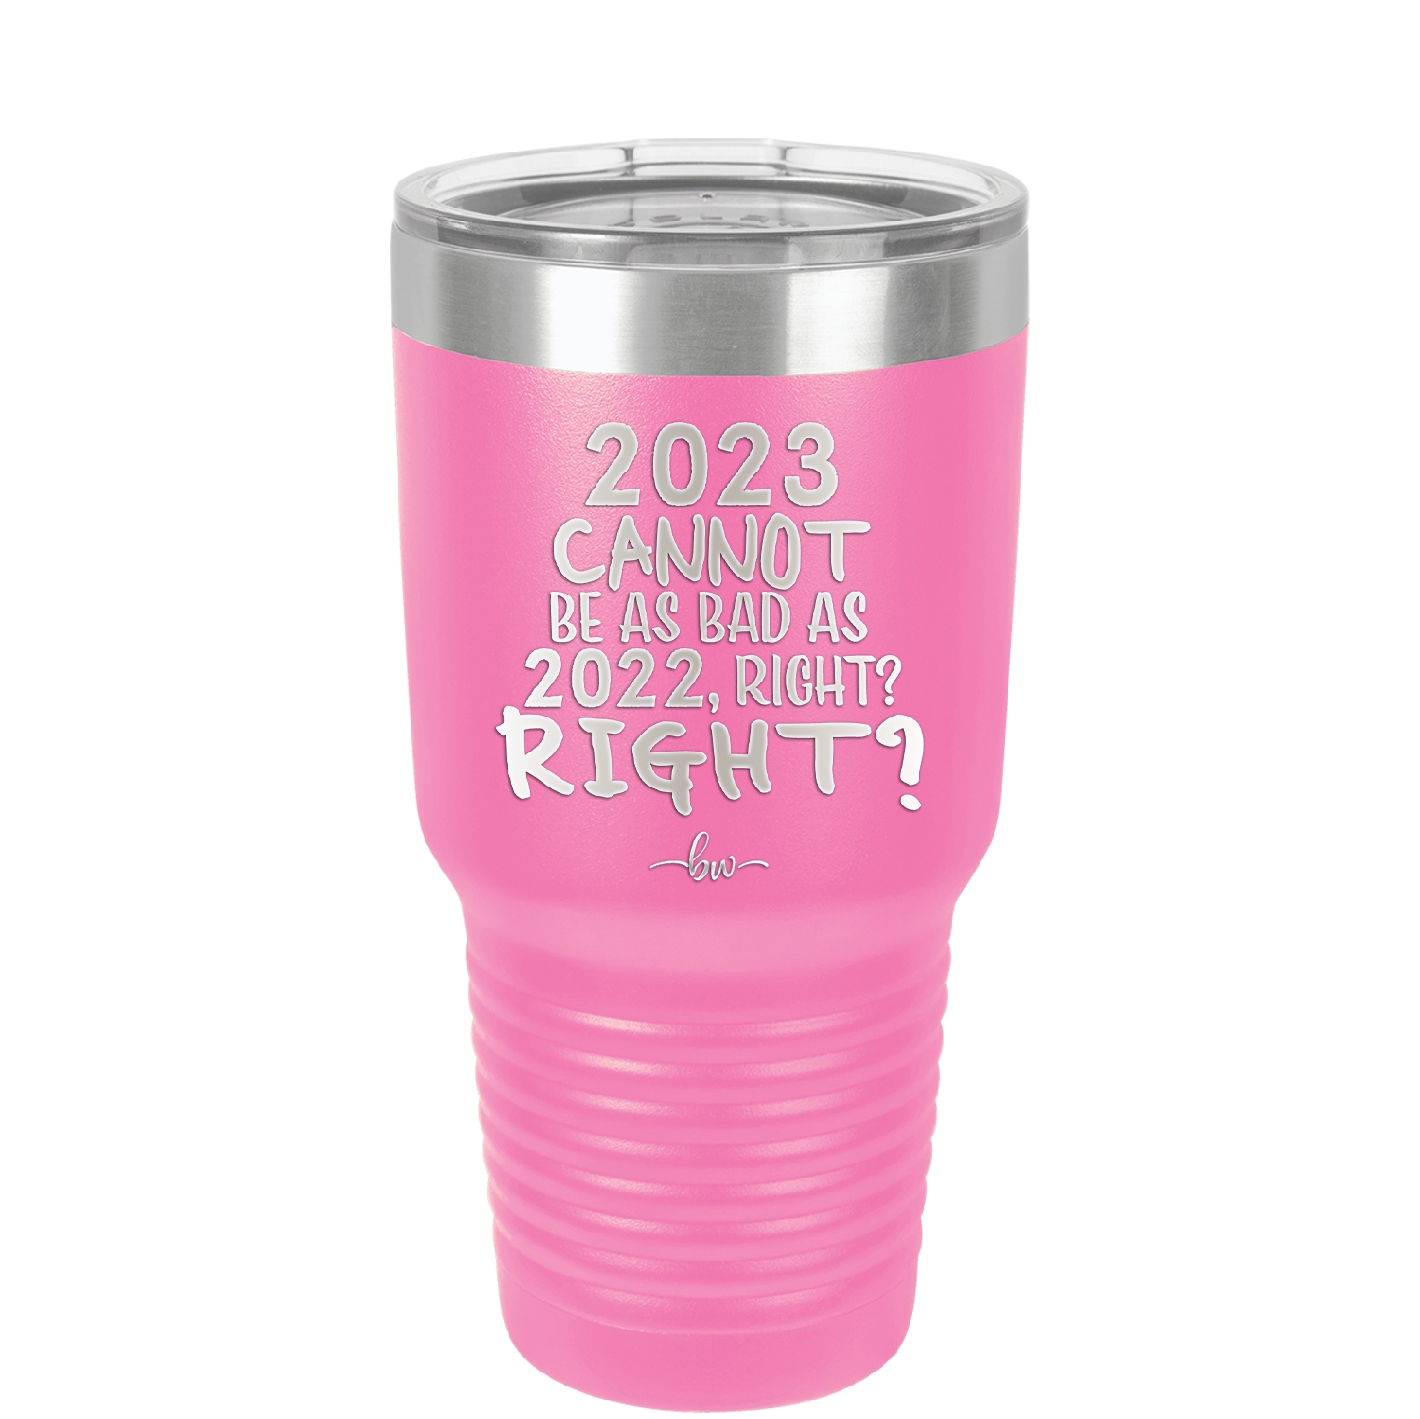 30 oz 2023 cannot be as bas as 2022, right?right? -  pink